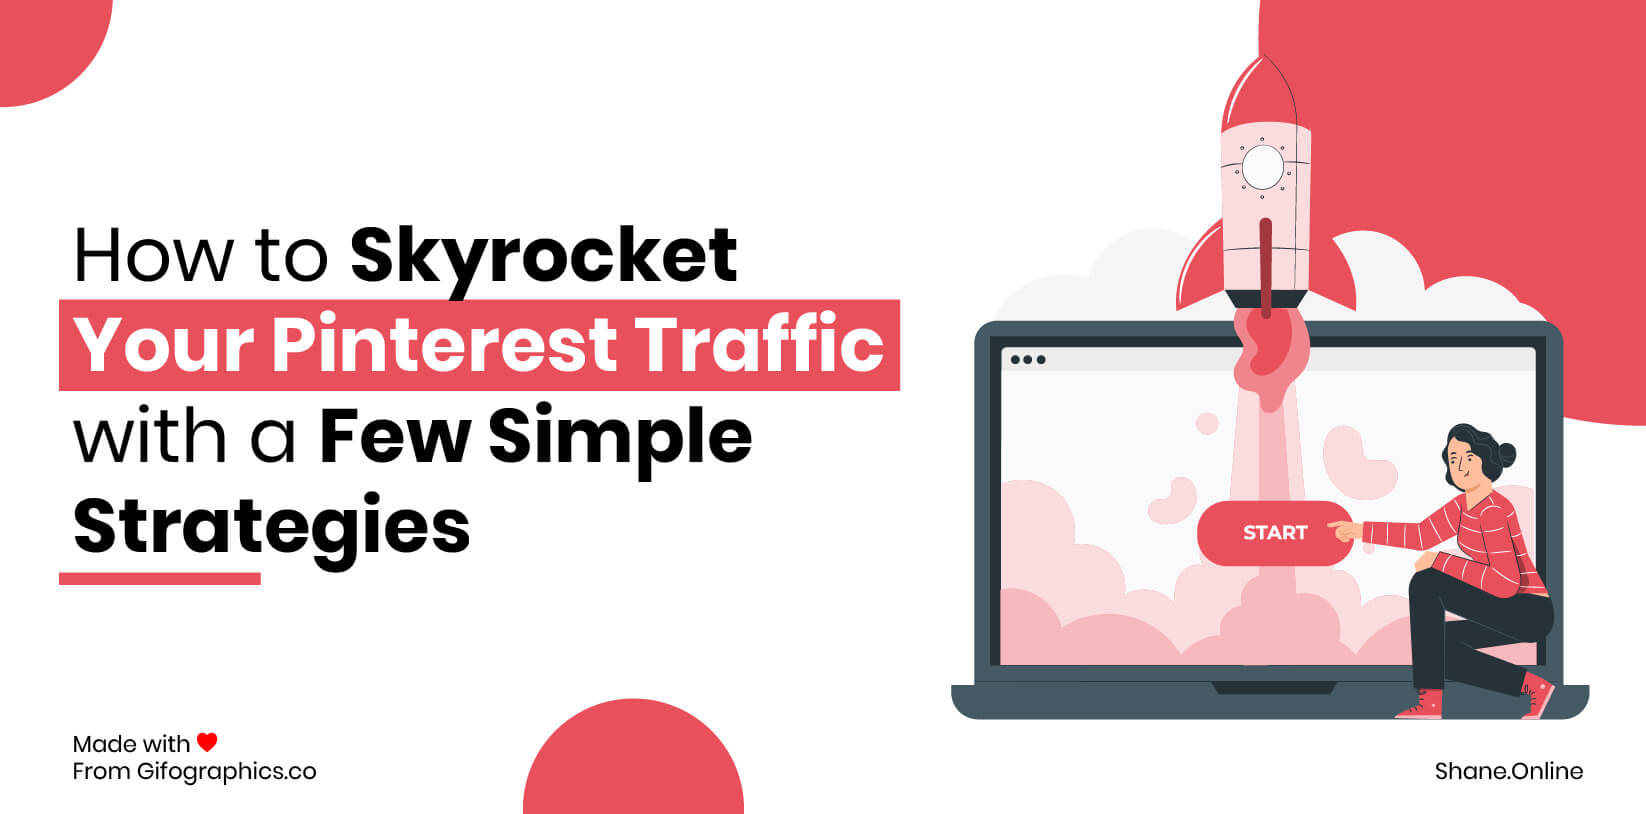 How to Skyrocket Your Pinterest Traffic with Proven Strategies